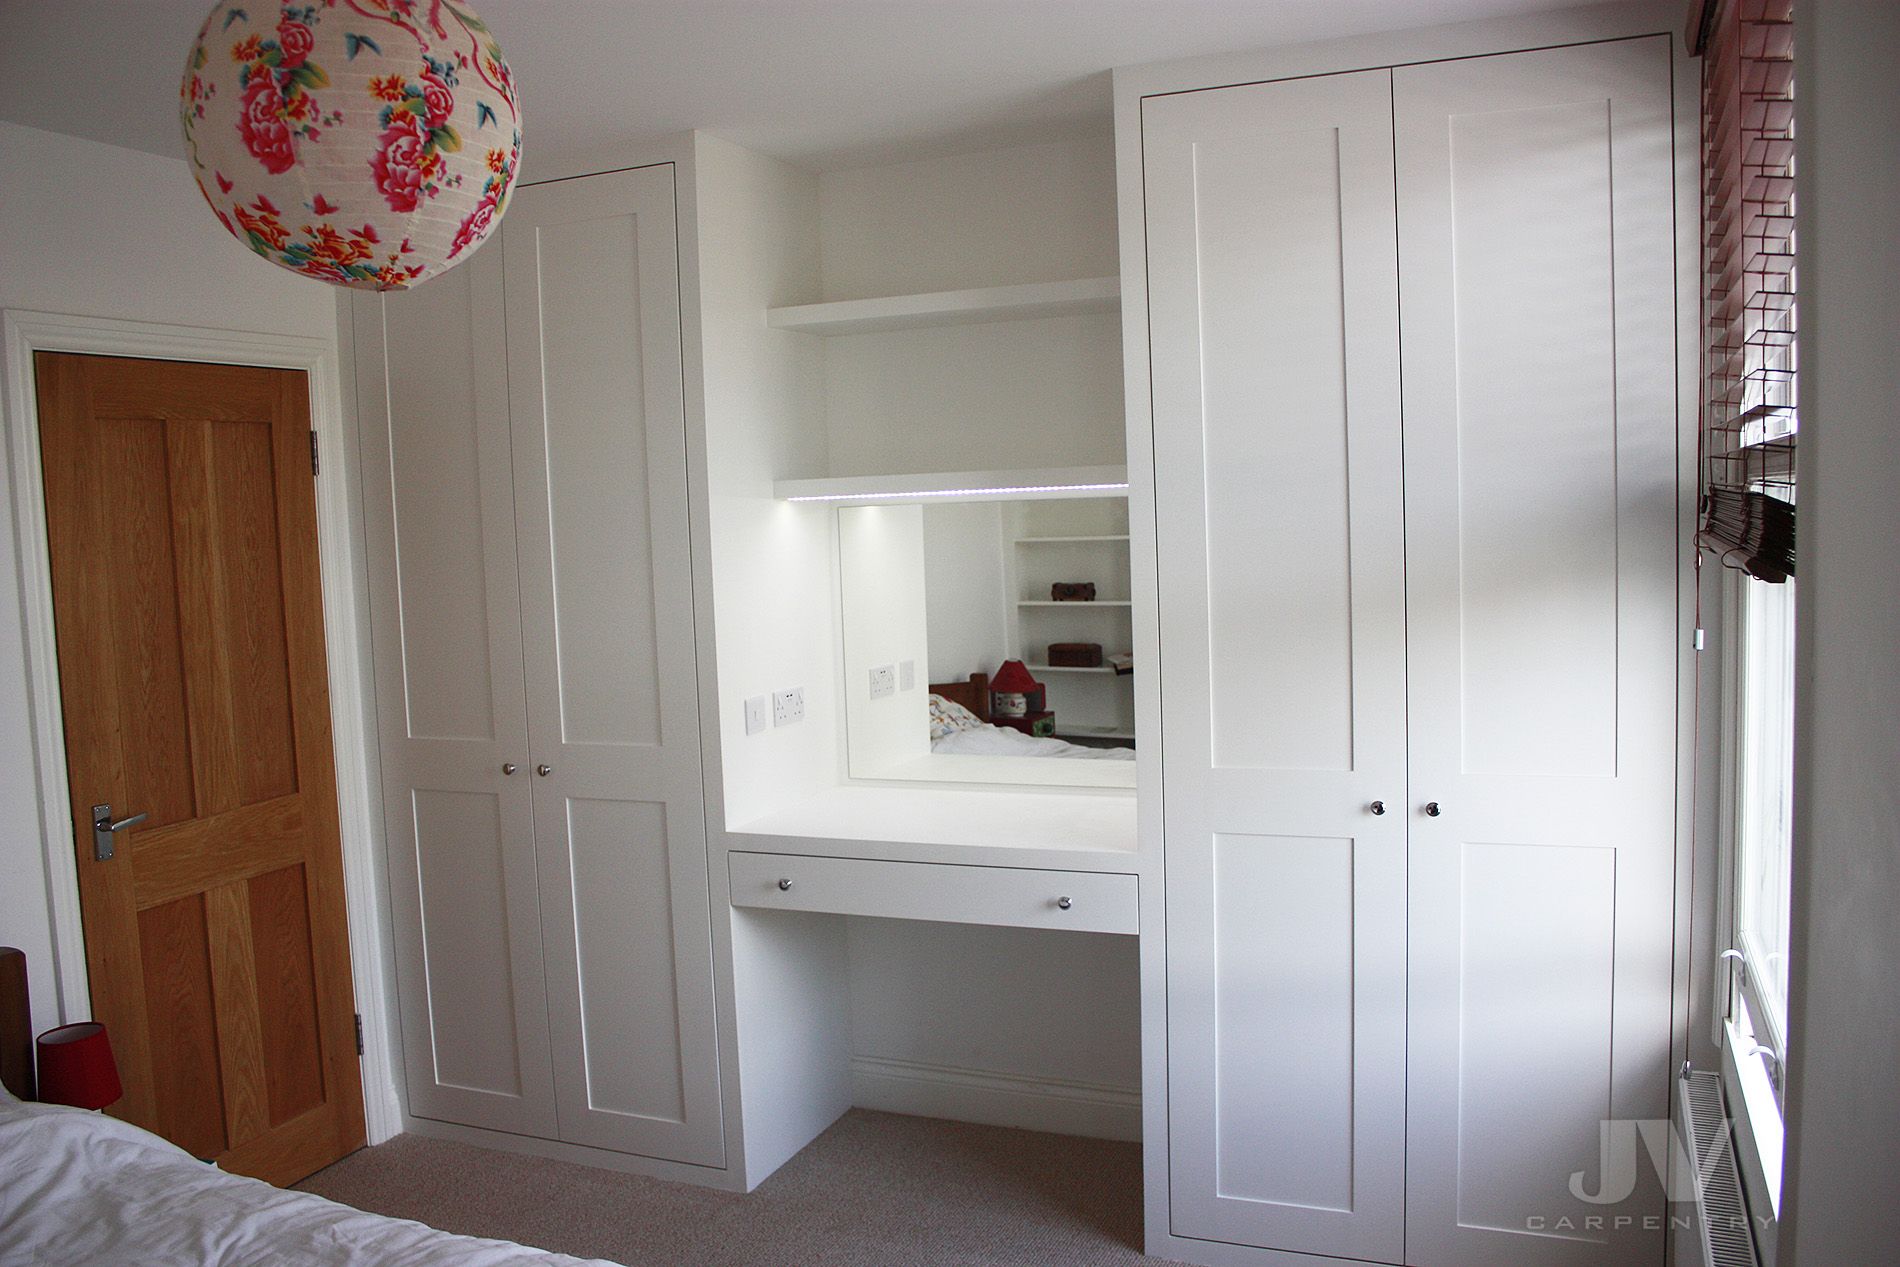 9 Fitted Wardrobes With Dressing Table Ideas | Jv Carpentry With Regard To Wardrobes And Dressing Tables (View 2 of 22)